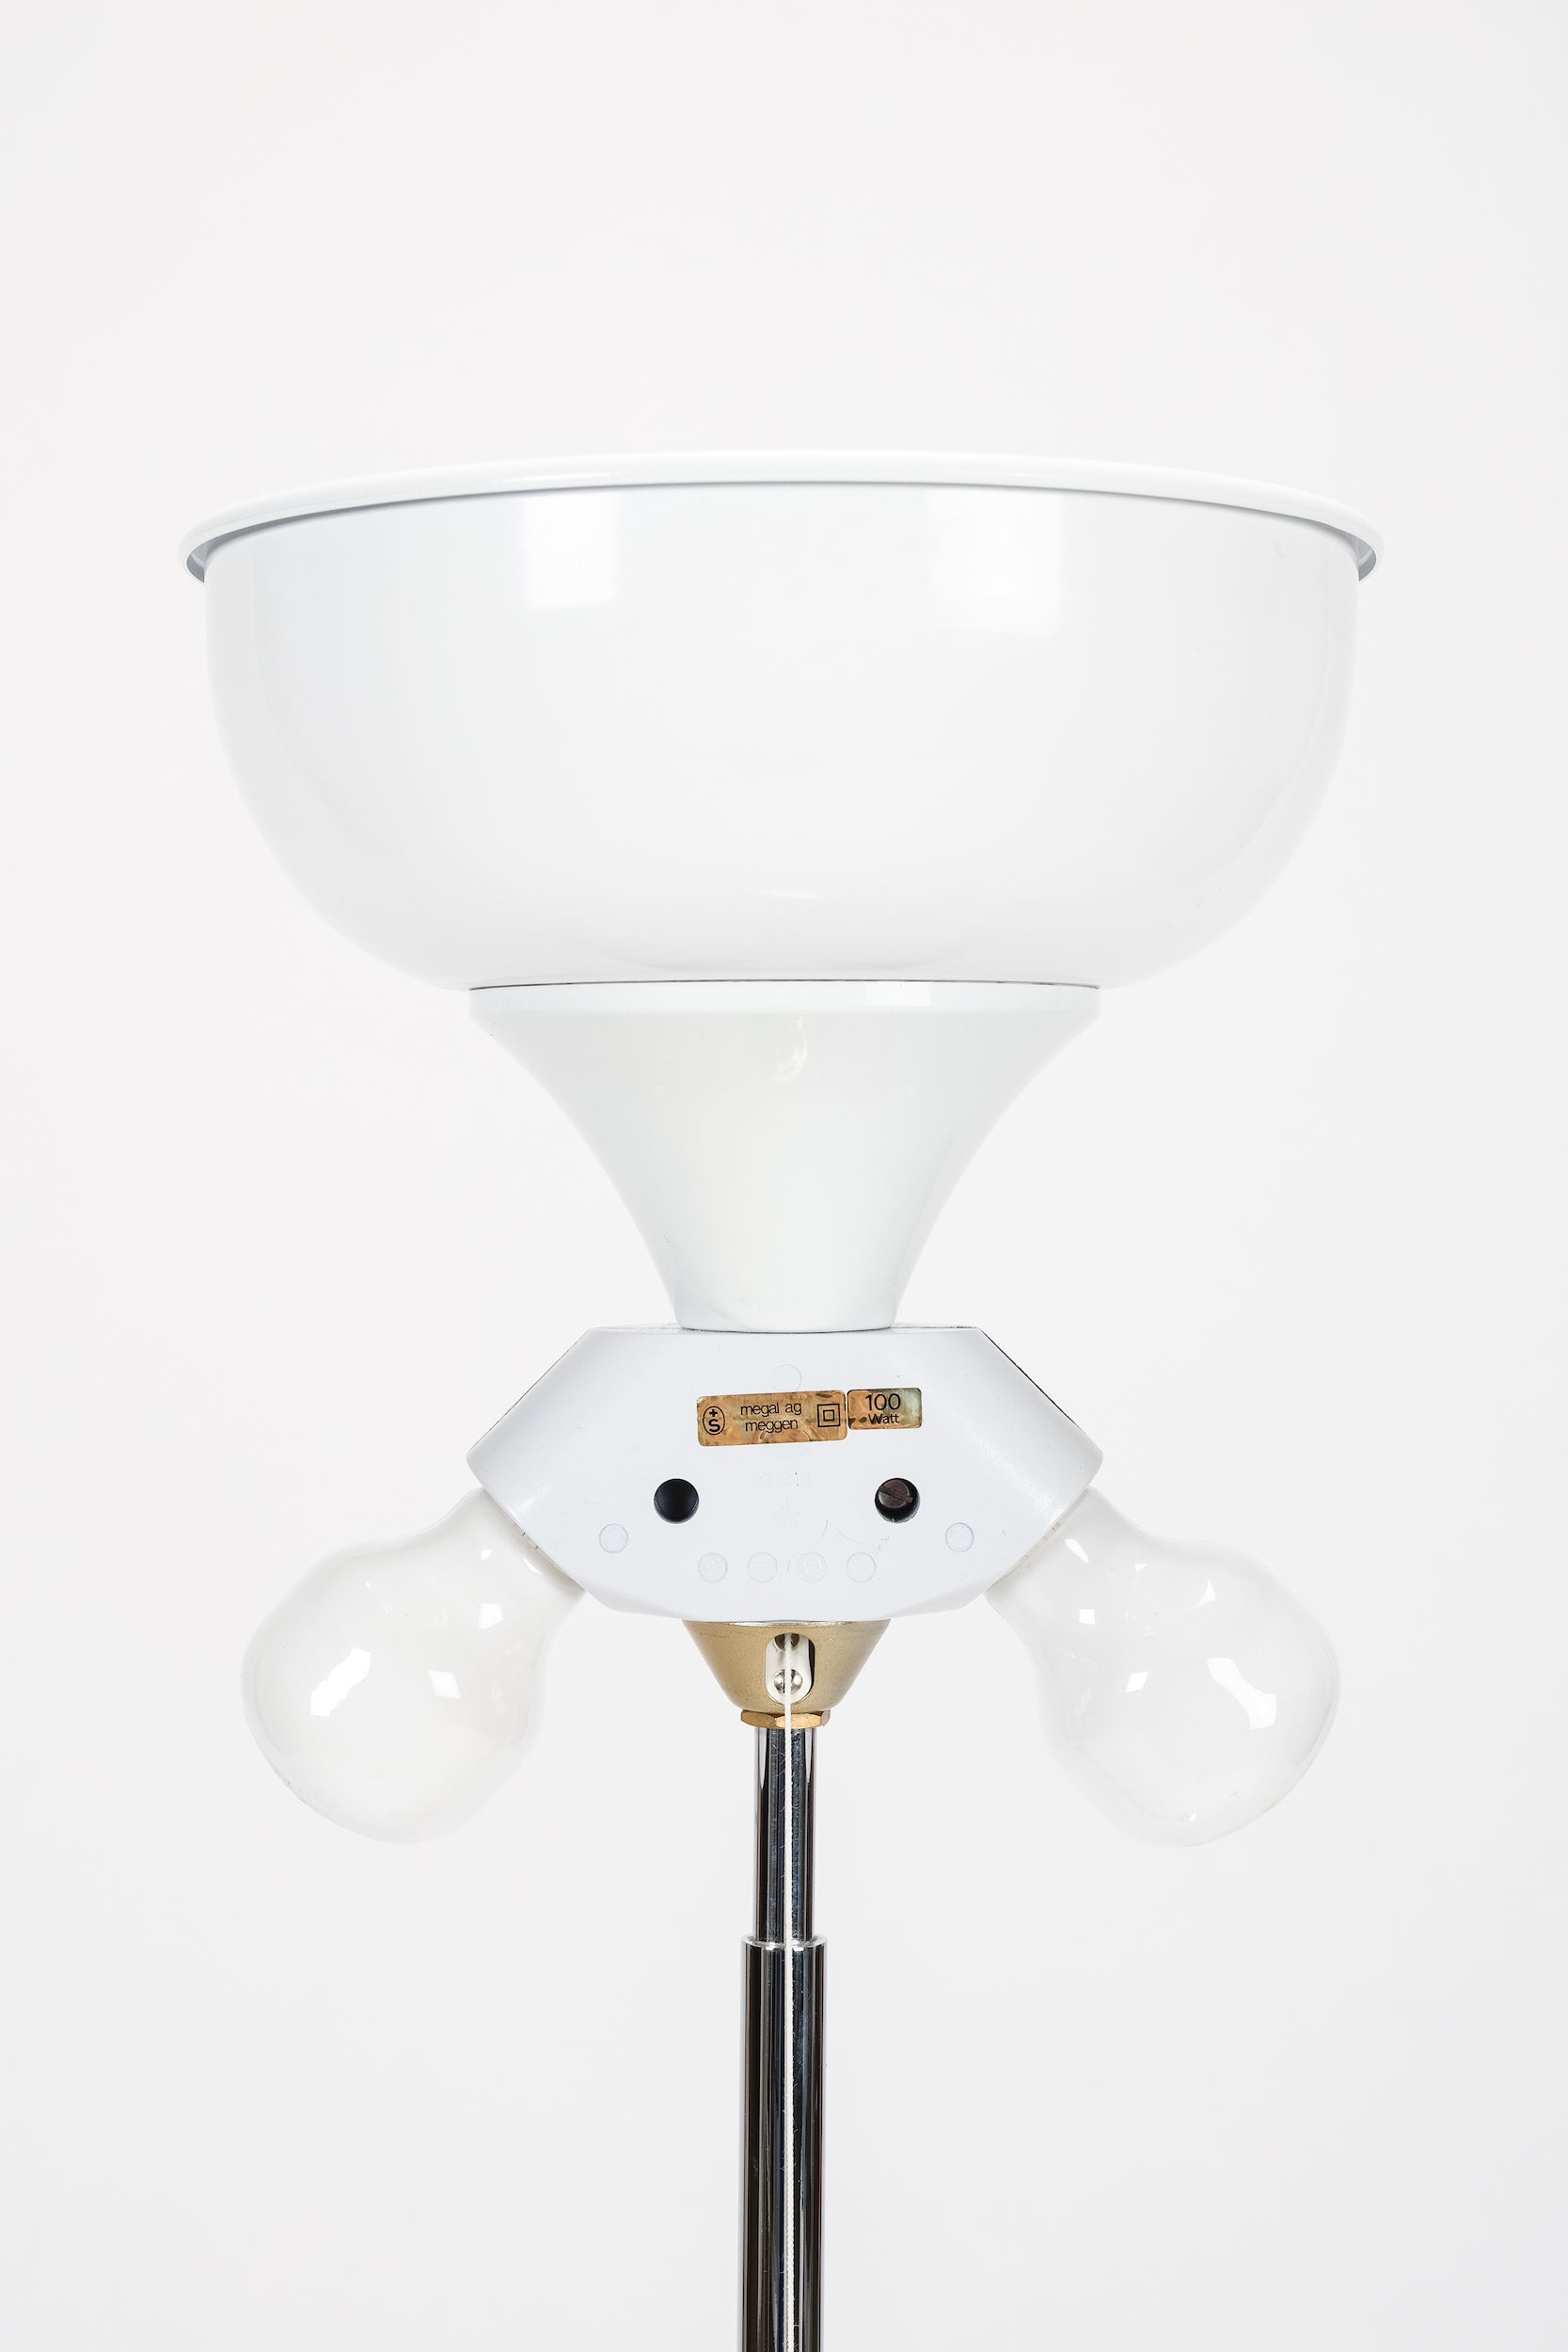 Floor Lamp, Chrome with Parchment Screen, Mégal, 70s